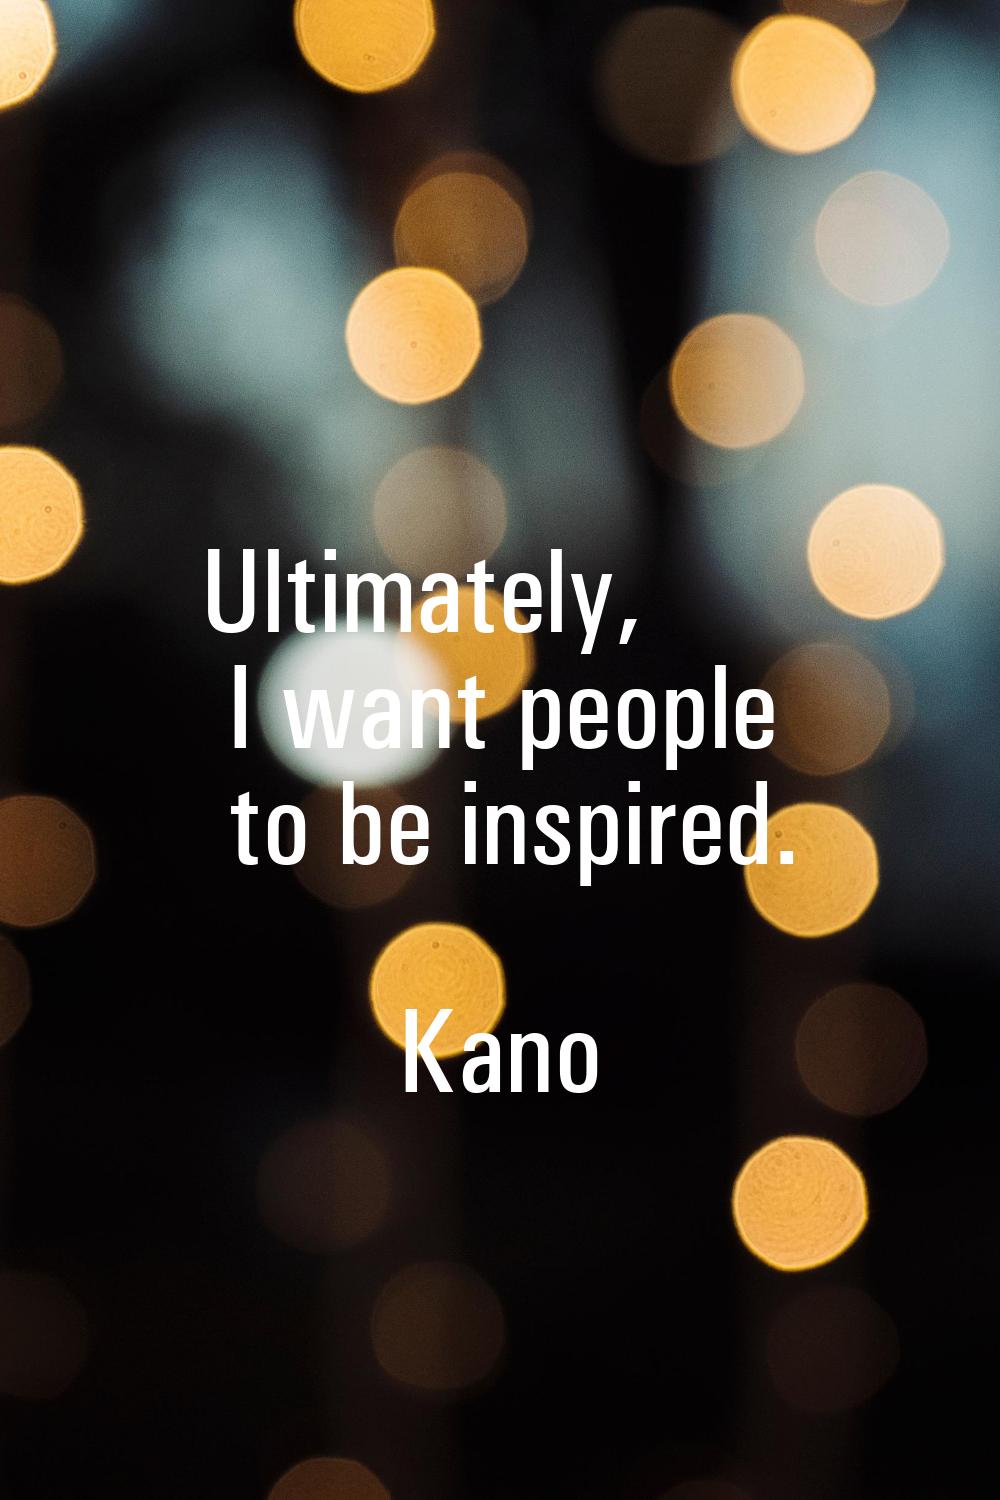 Ultimately, I want people to be inspired.